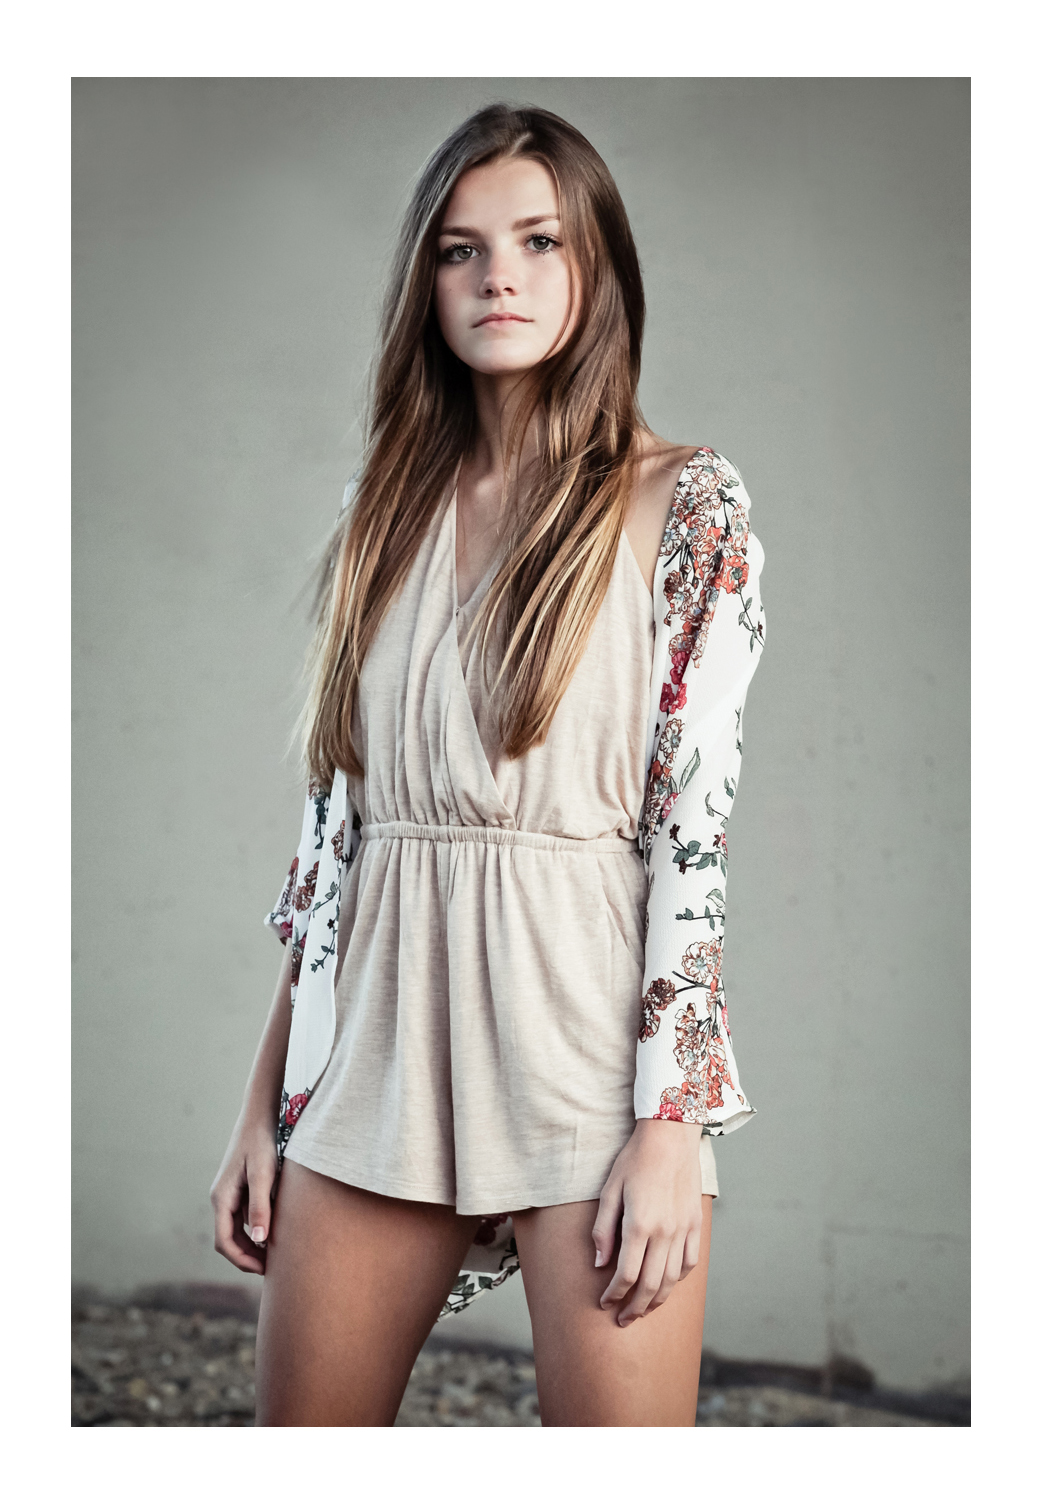 A young teen model with long brown hair stands facing the photographer wearing a canvas dress and a long flower-print blouse